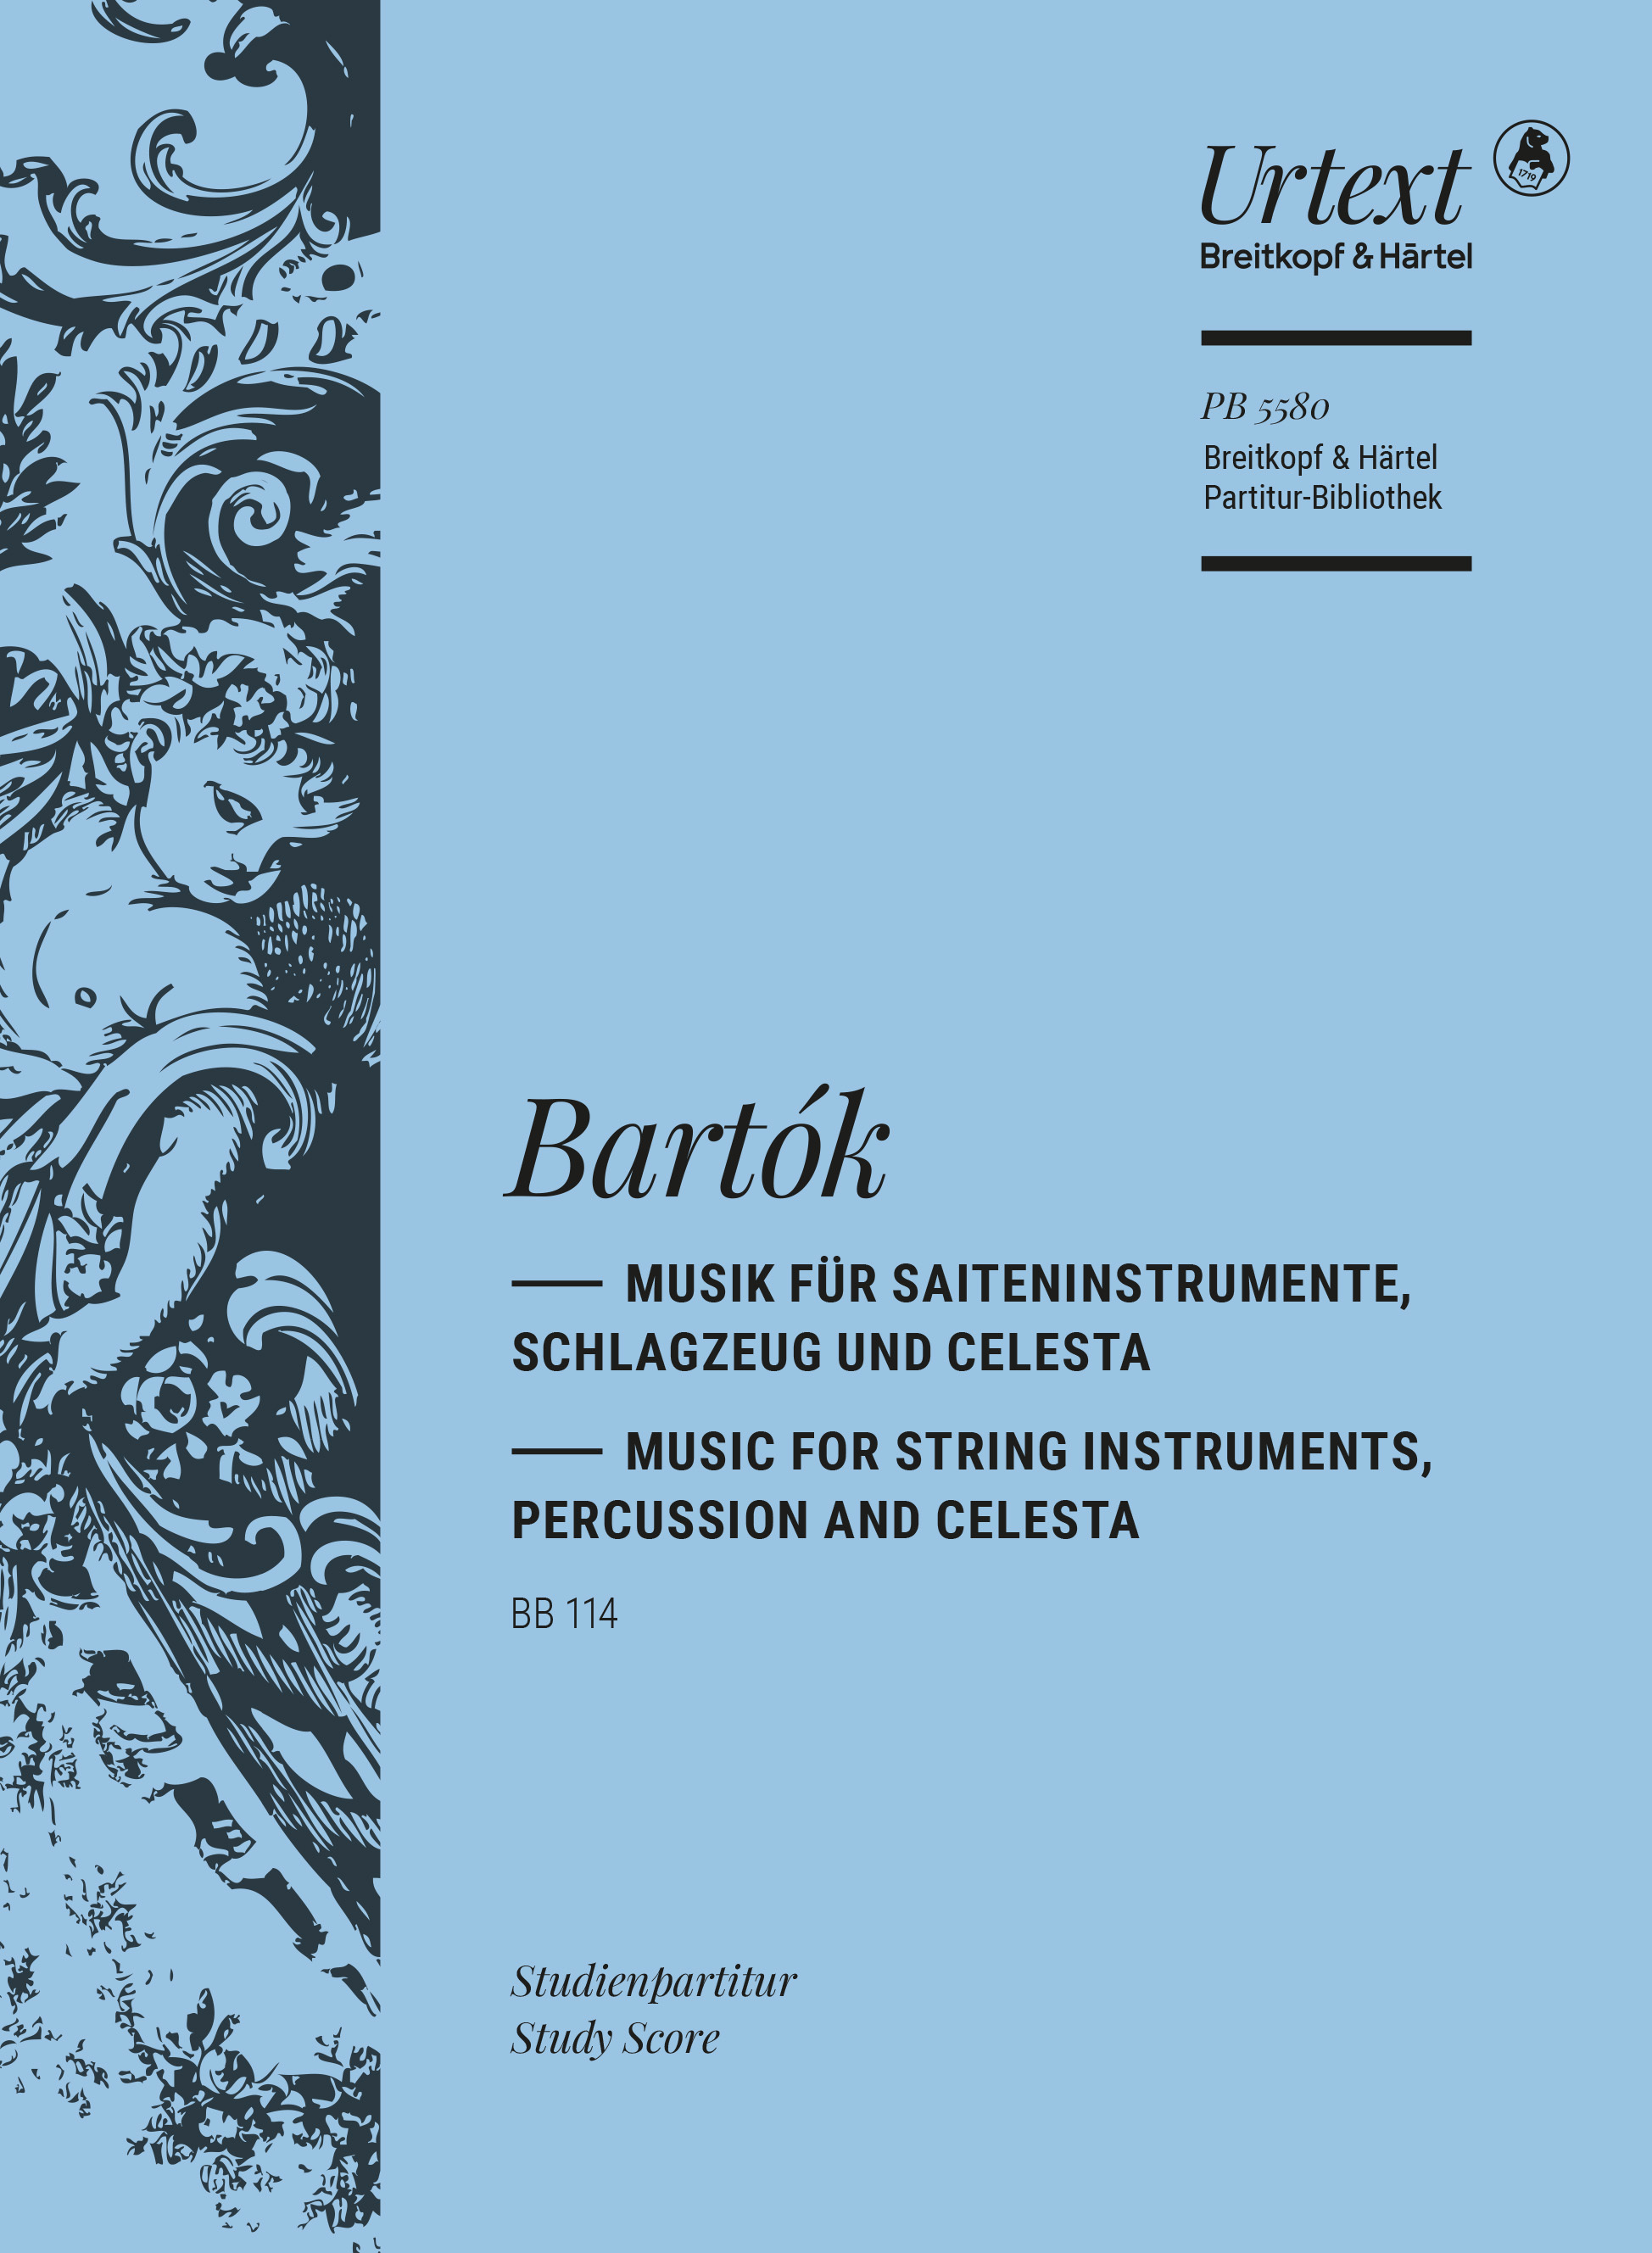 Bartok Music For Strings Percussion & Celesta Stsc Sheet Music Songbook